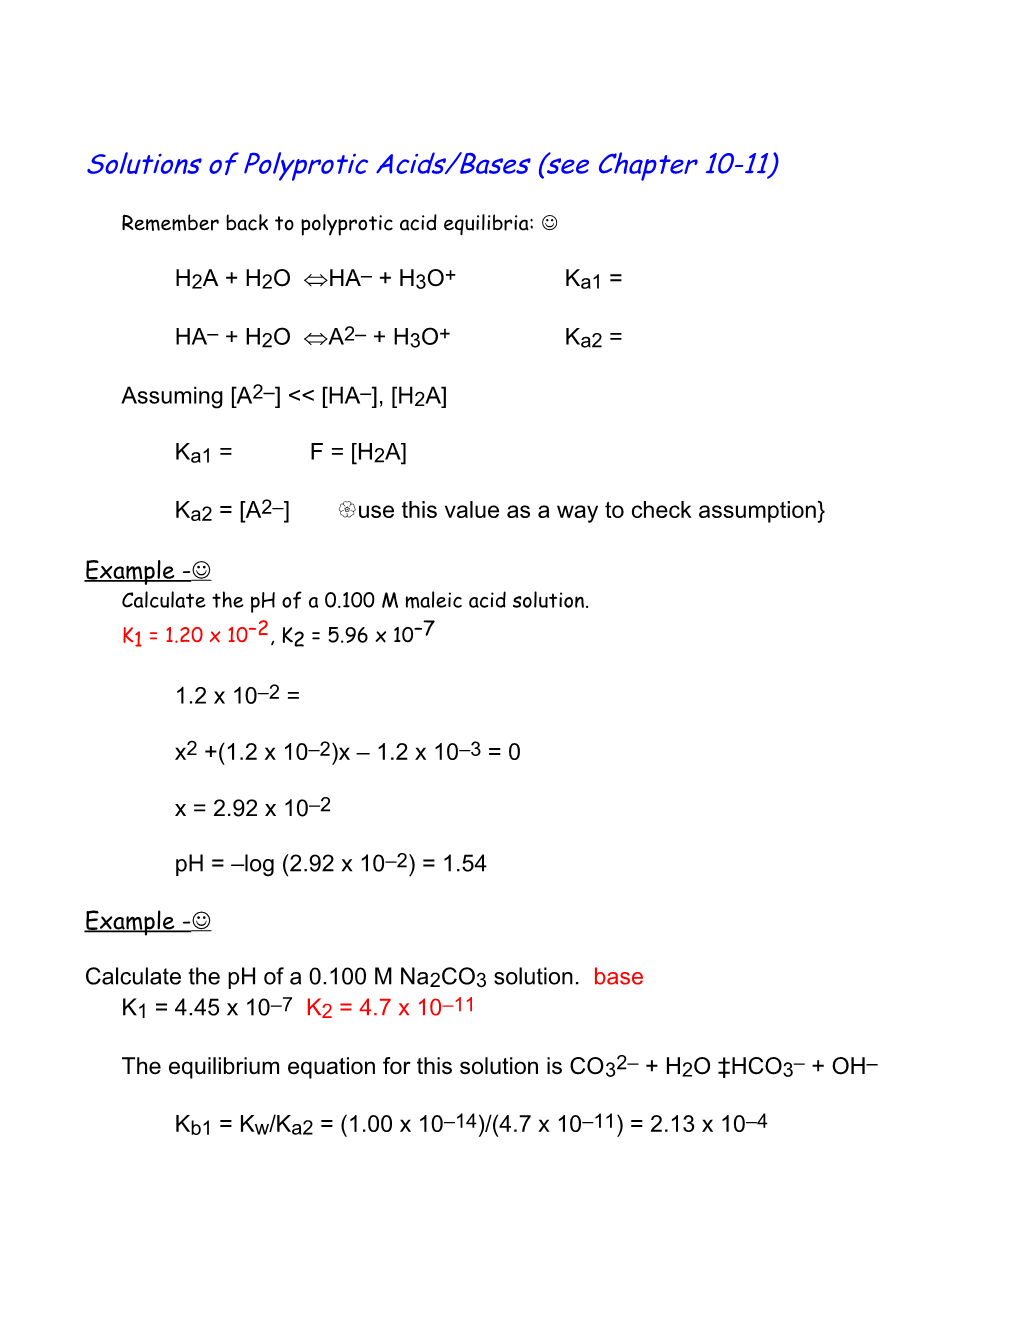 Solutions of Polyprotic Acids/Bases (See Chapter 10-11)